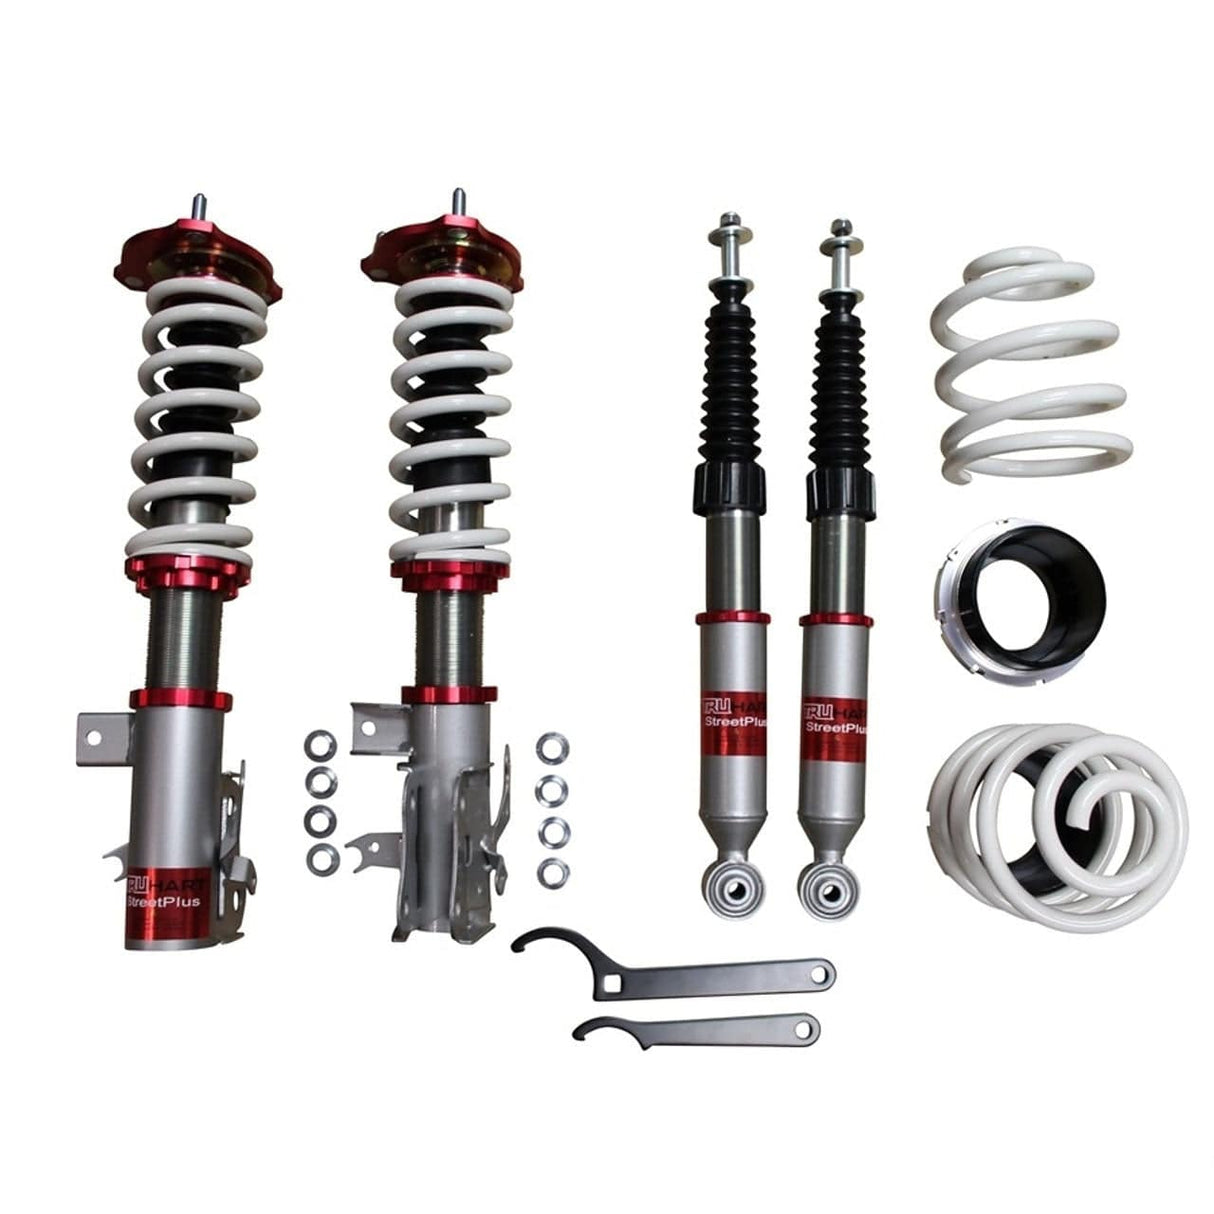 TruHart StreetPlus Coilovers for 2012-2013 Honda Civic Si